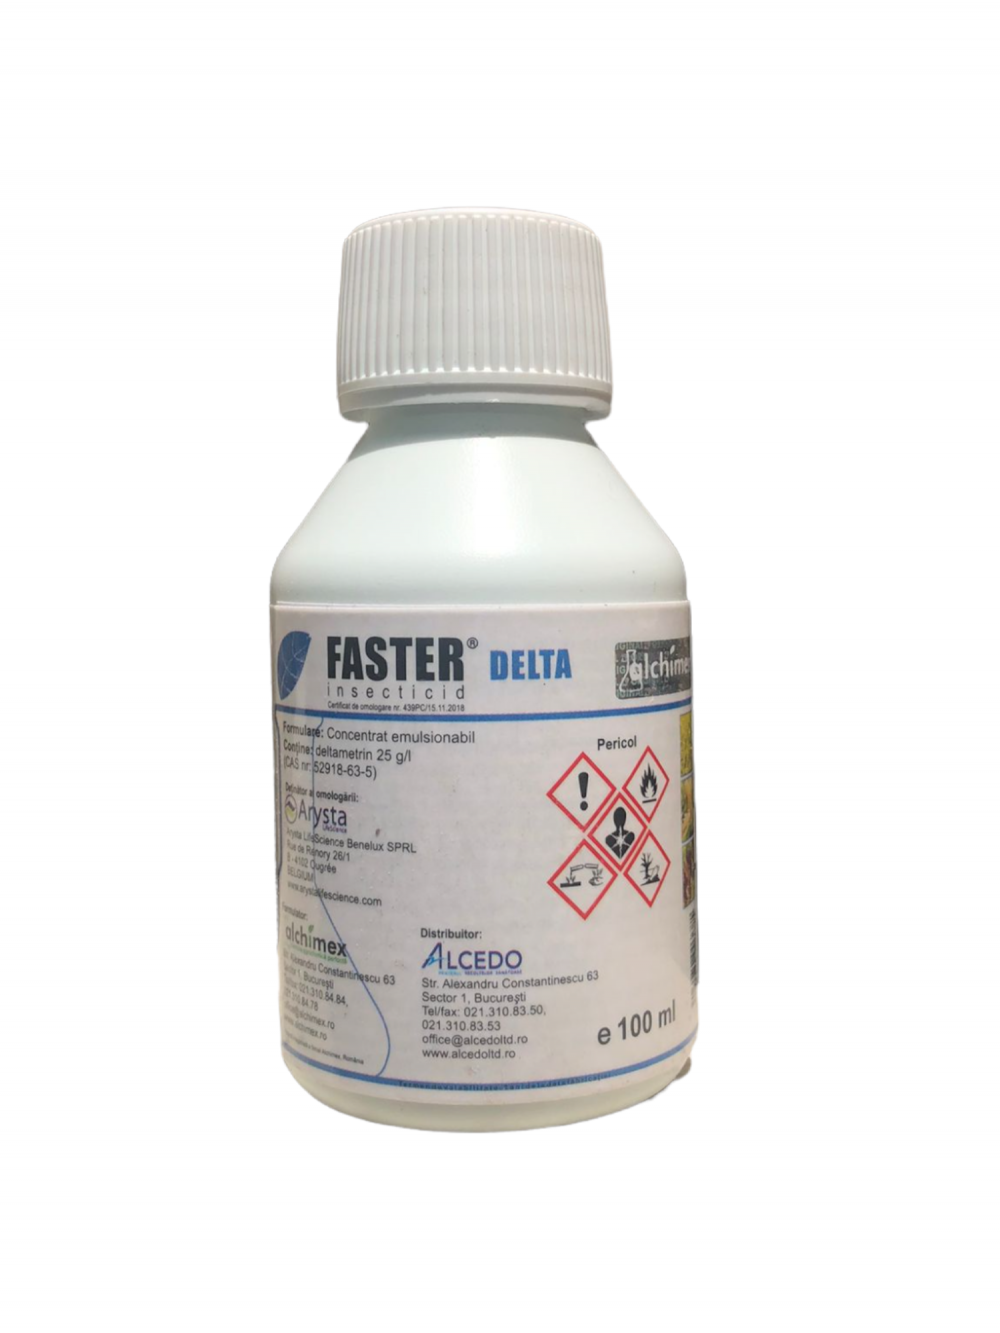 Insecticid Faster Delta 100 ml